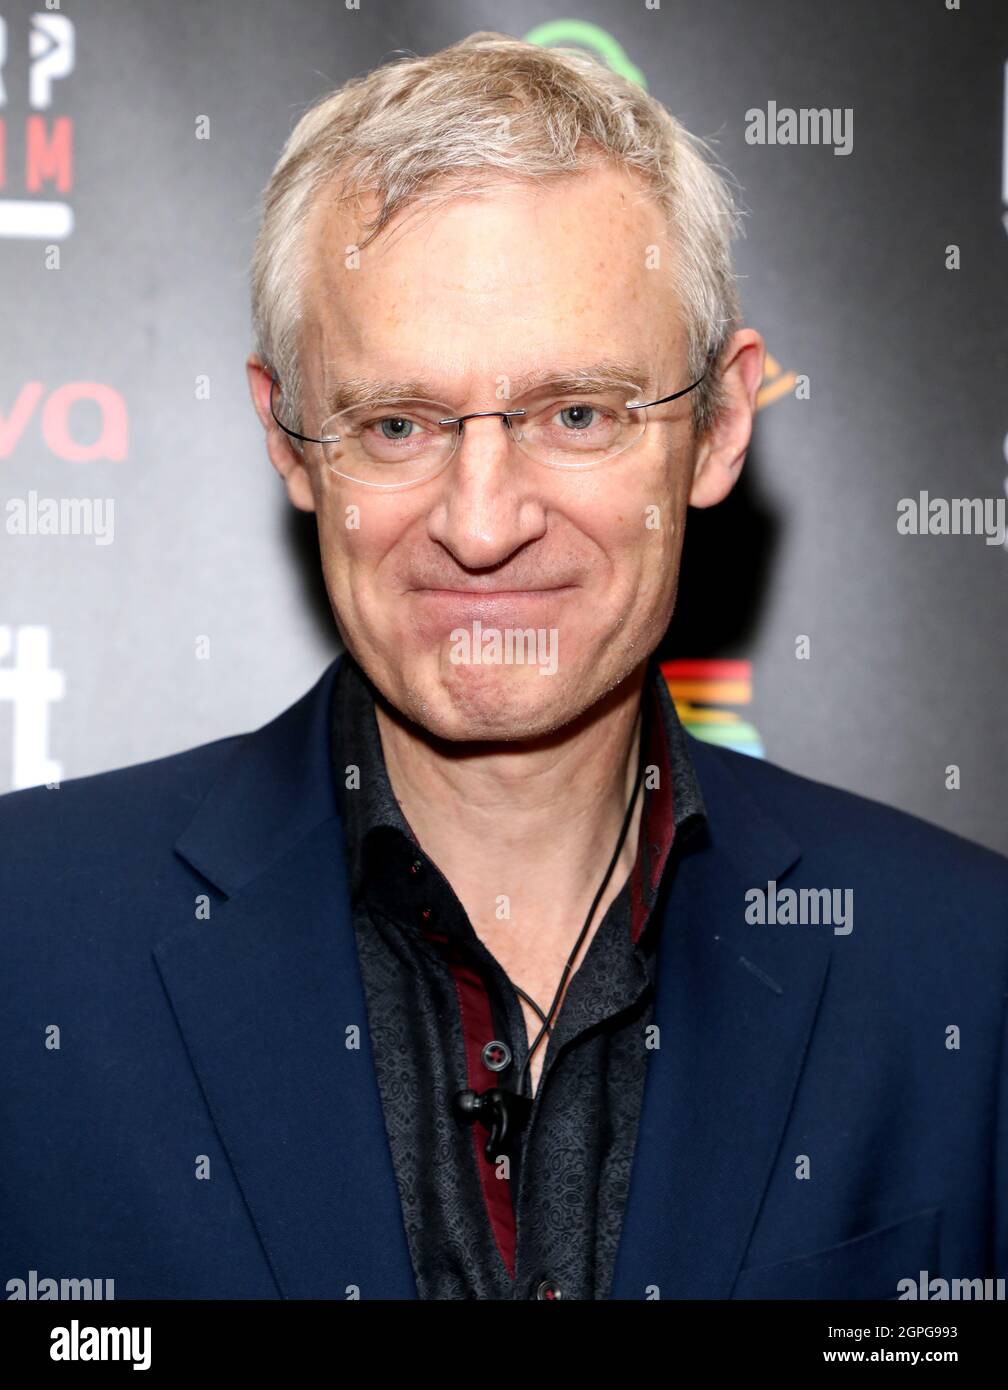 File photo dated 04/03/20 of Jeremy Vine attending The Audio and Radio Industry Awards held at The London Palladium, London. Jeremy Vine has said Channel 5 is treating quiz show Eggheads as if it is a 'very expensive Ming vase'. The programme, which sees teams of contestants try to beat a panel of specialist quizzers in a test of their general knowledge, has moved to the broadcaster from the BBC. Stock Photo